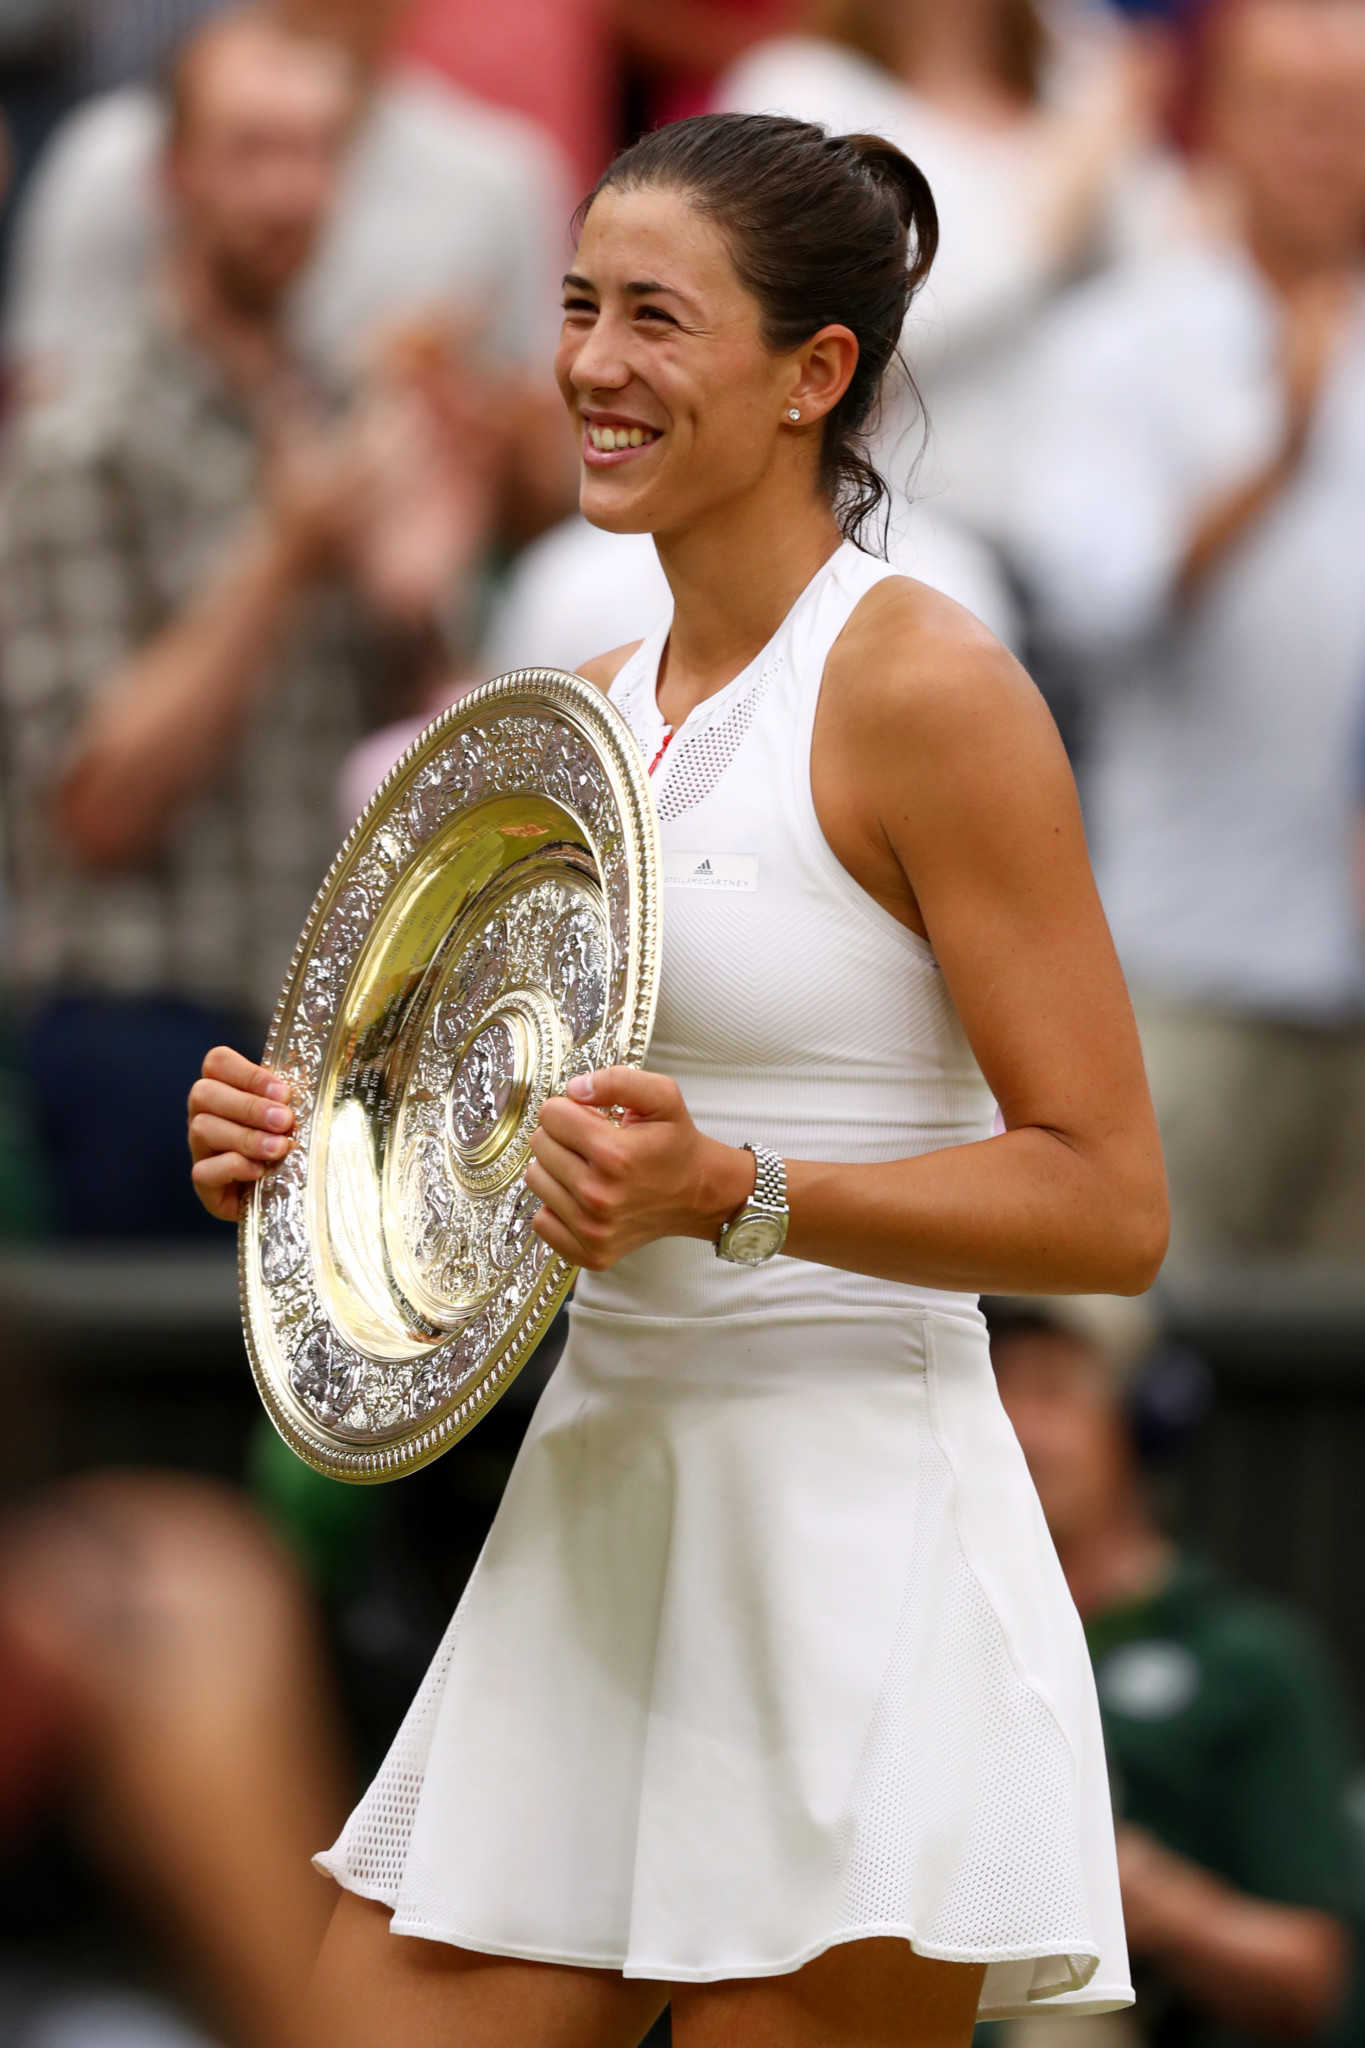 Garbine muguruza of spain celebrates victory with the trophy after the ladies singles final against venus williams. (photo by michael steele/getty images)